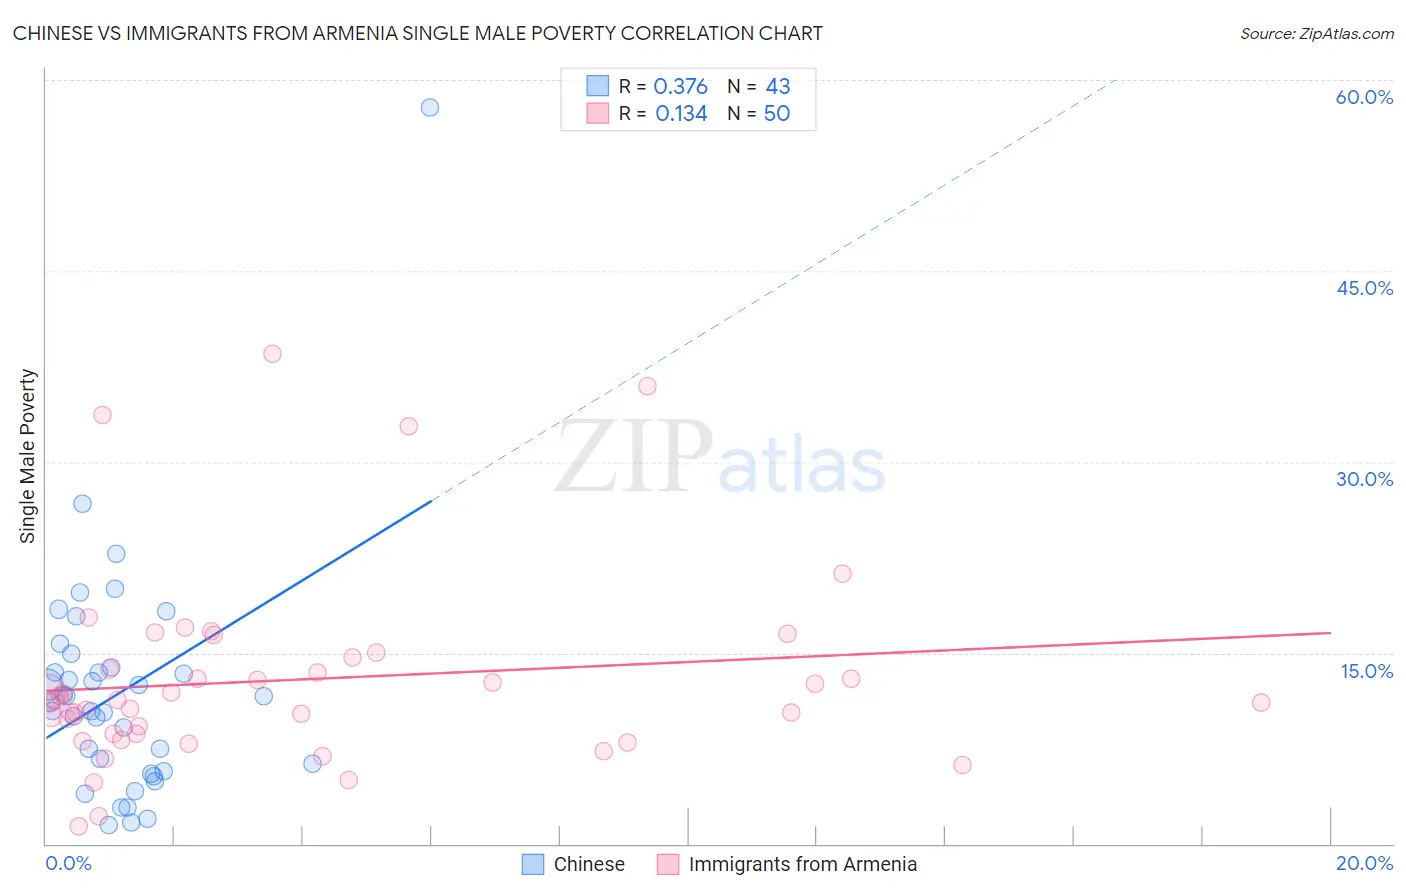 Chinese vs Immigrants from Armenia Single Male Poverty